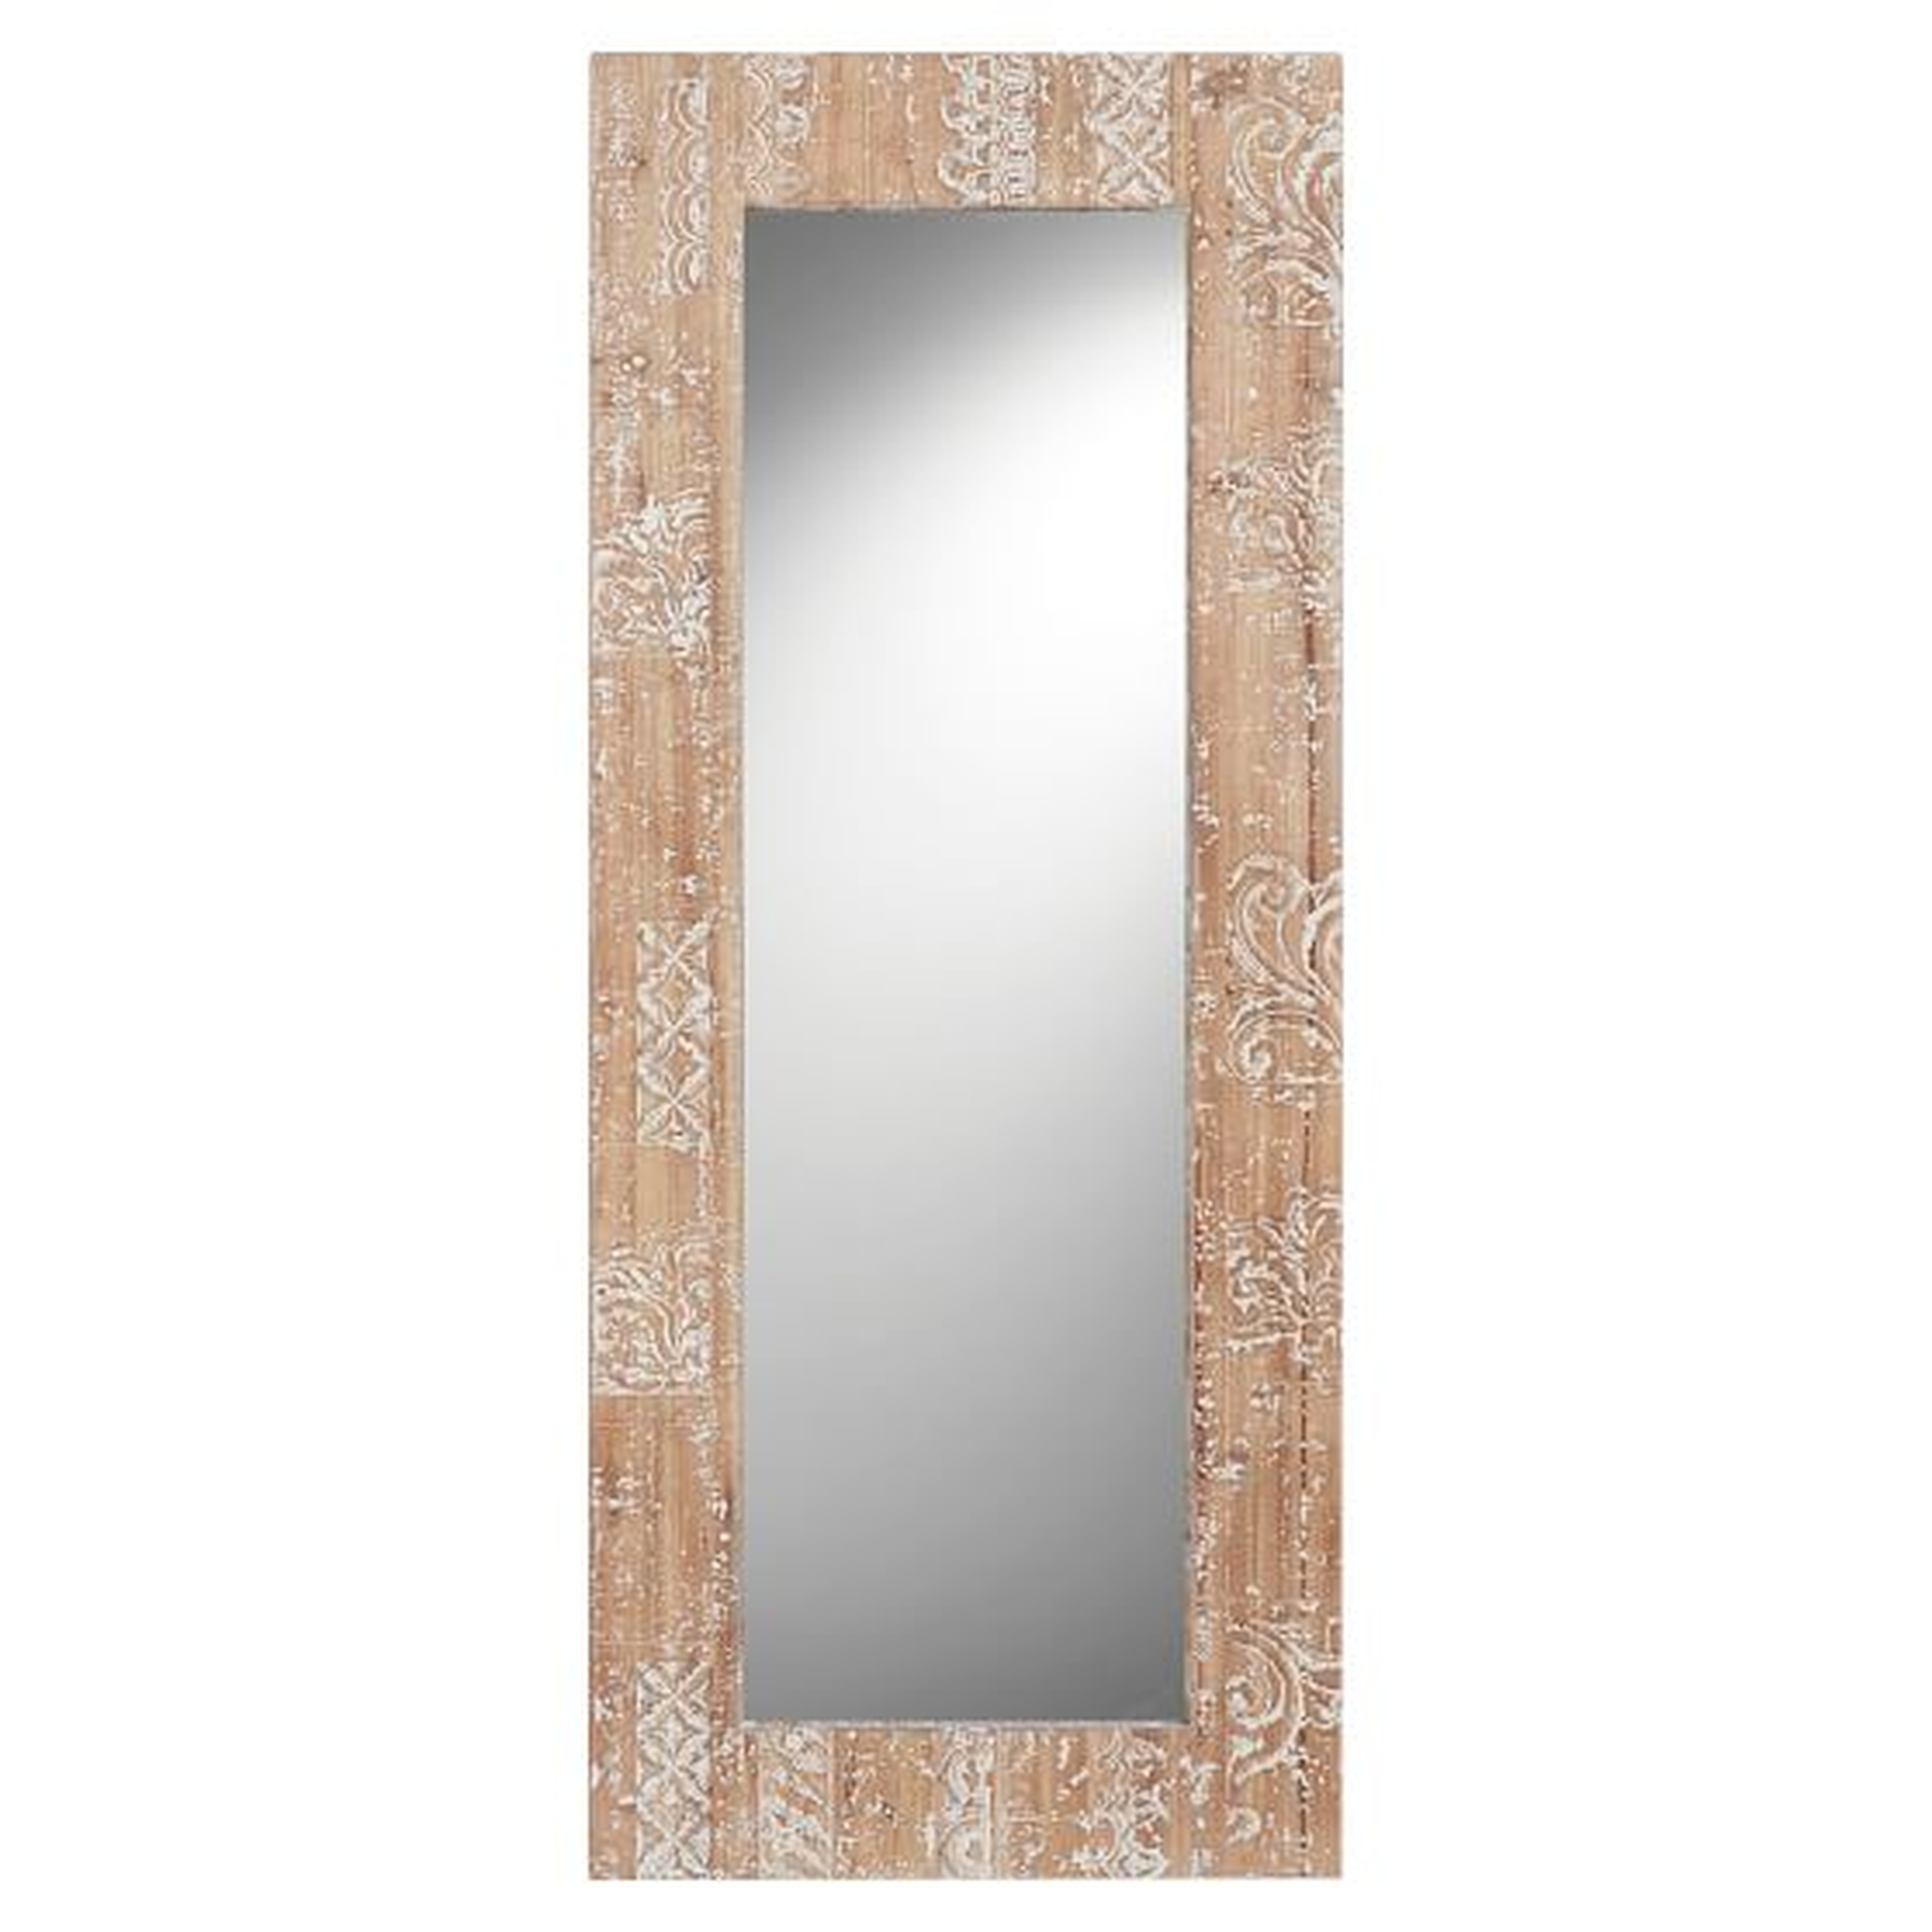 Carved Wood Floor Leaning Mirror Washed White Wood - Pottery Barn Teen